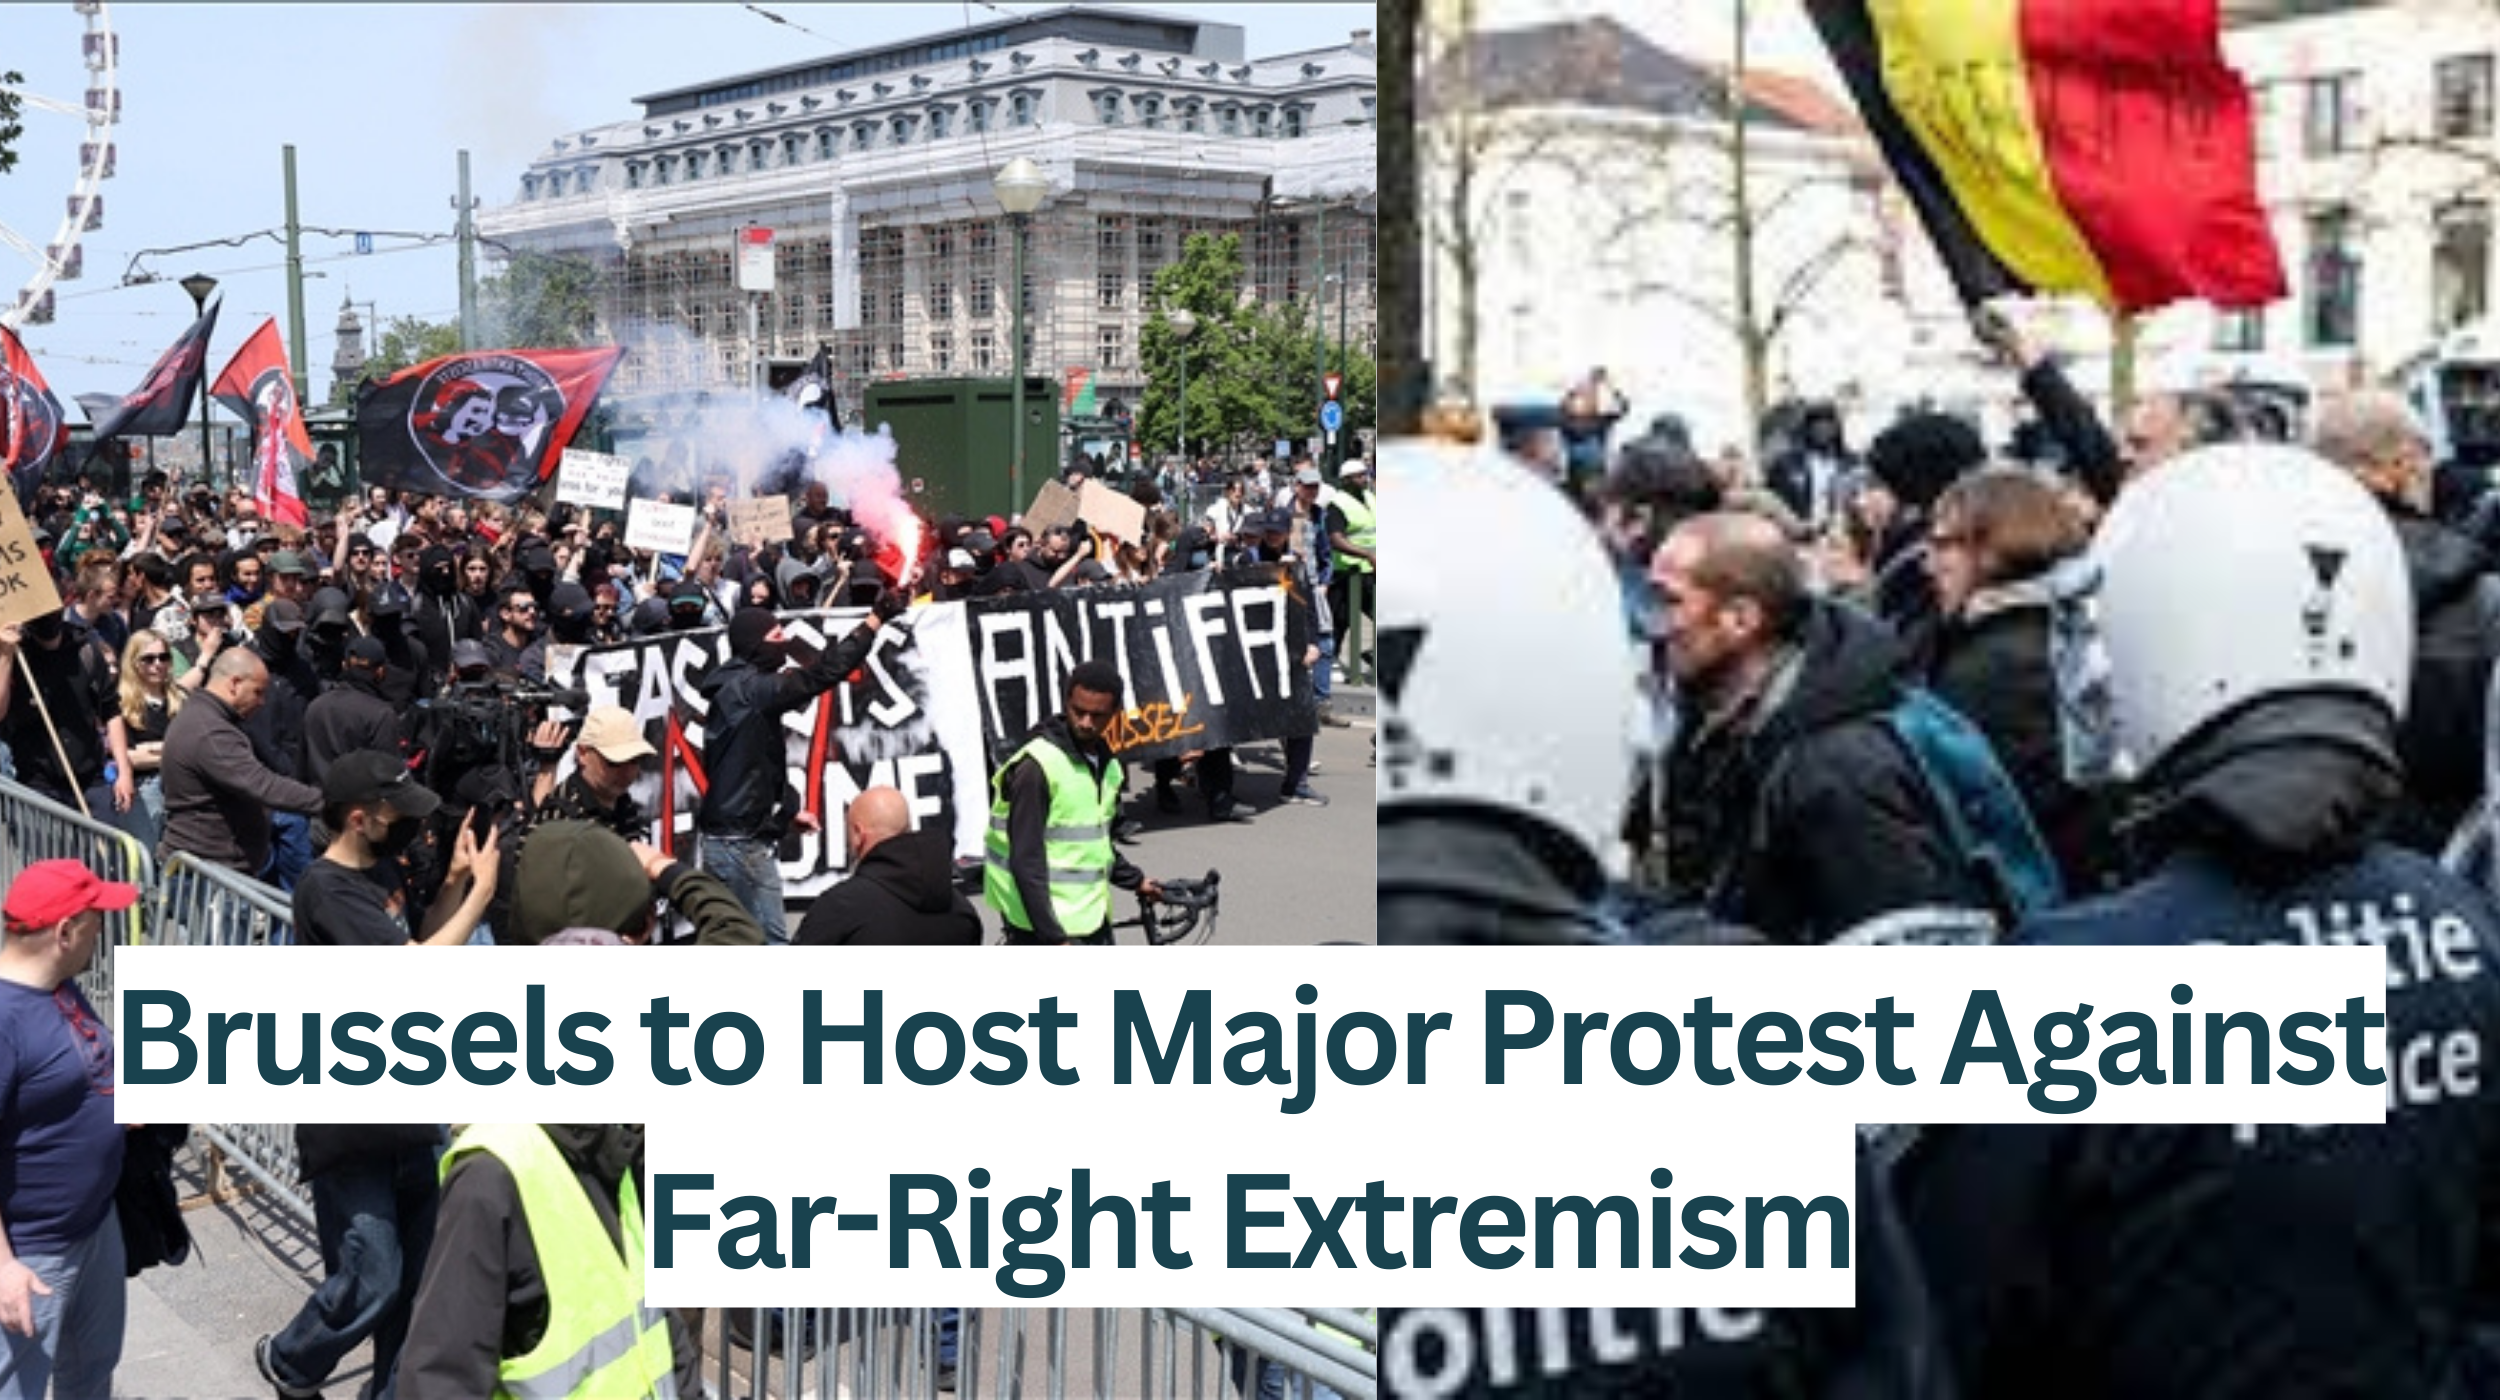 russels-to-Host-Major-Protest-Against-Far-Right-Extremism